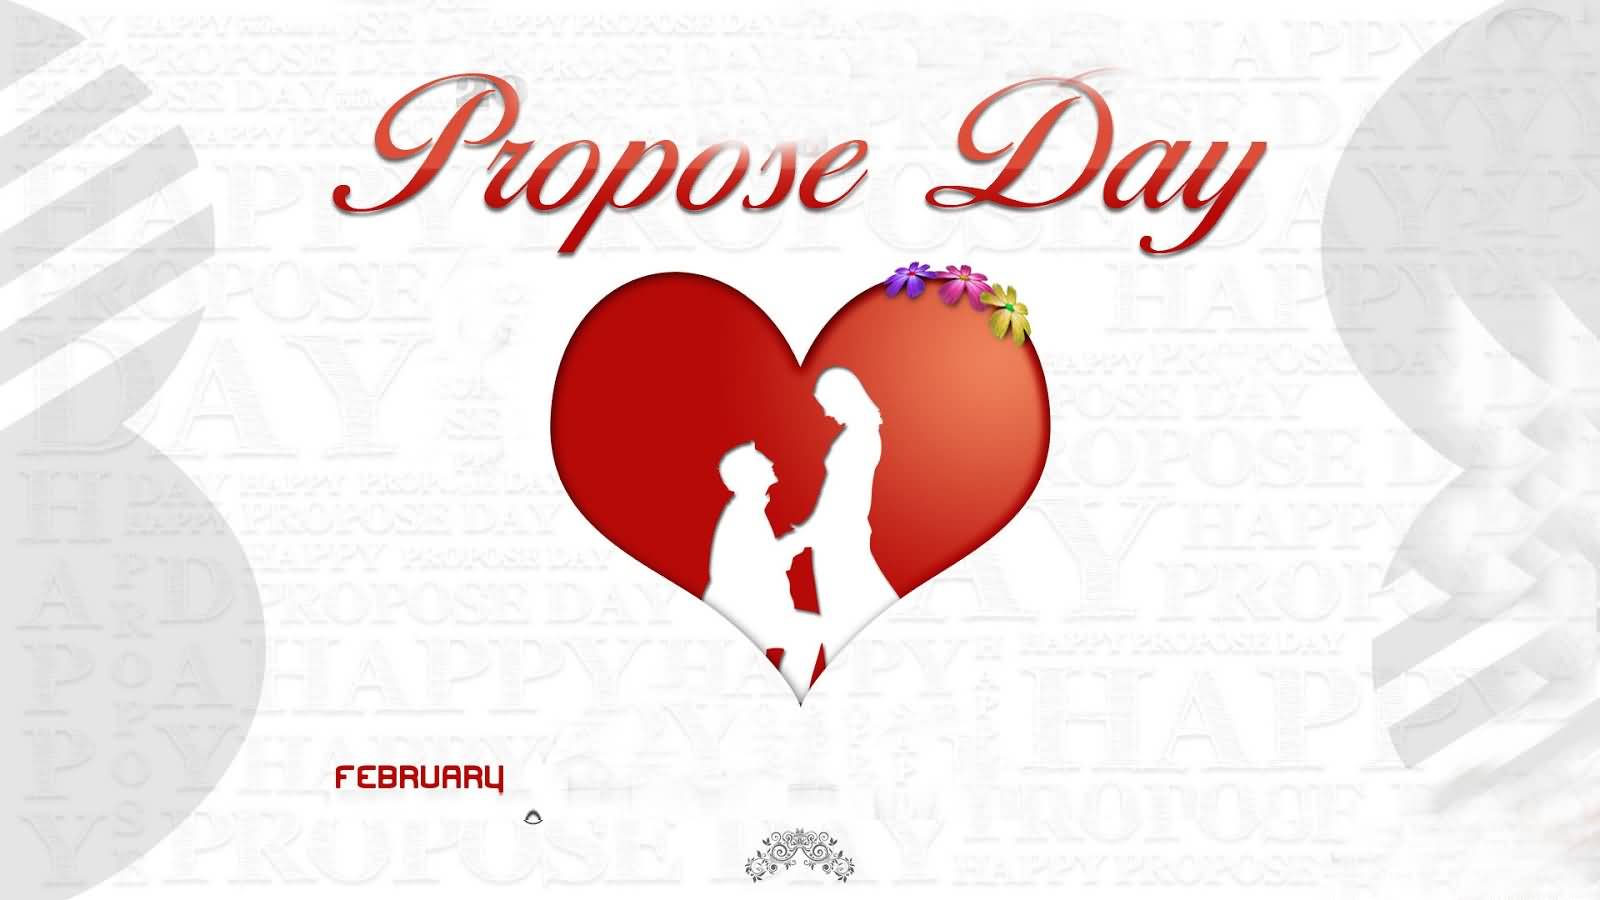 Propose Day February 8th Greeting Card